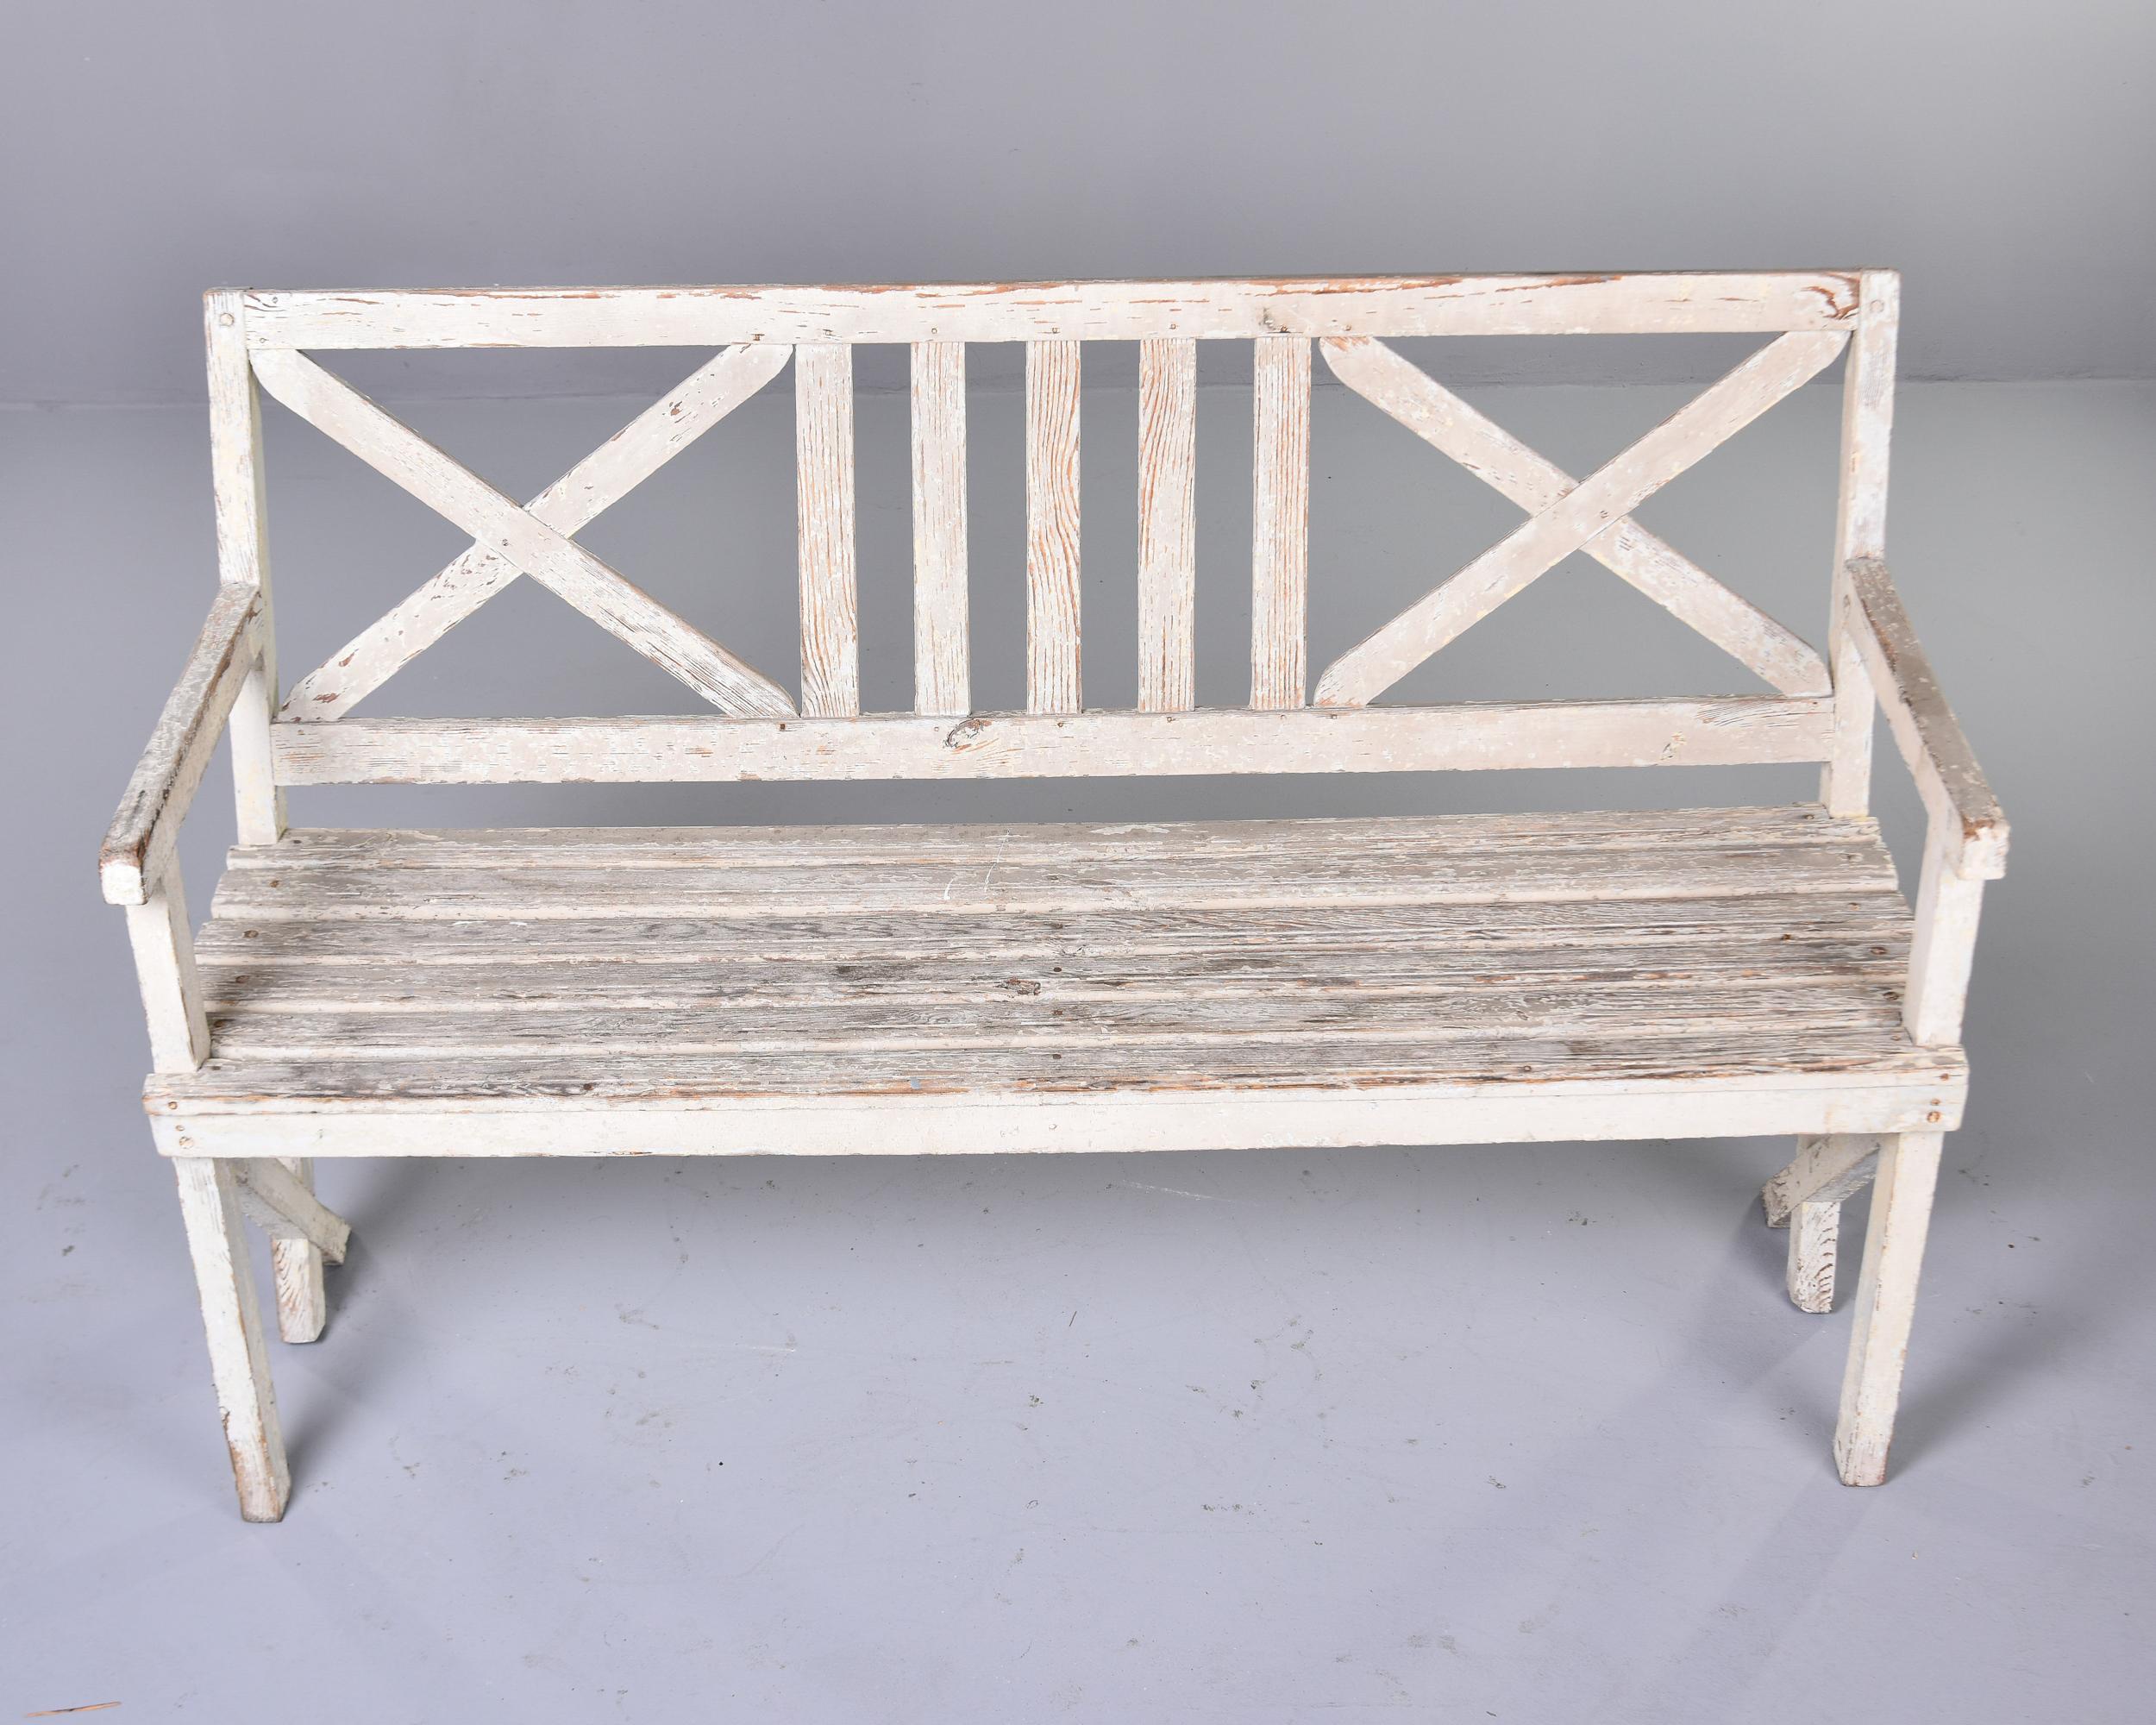 20th Century Antique English Painted Wood Bench with Cross Accented Back For Sale